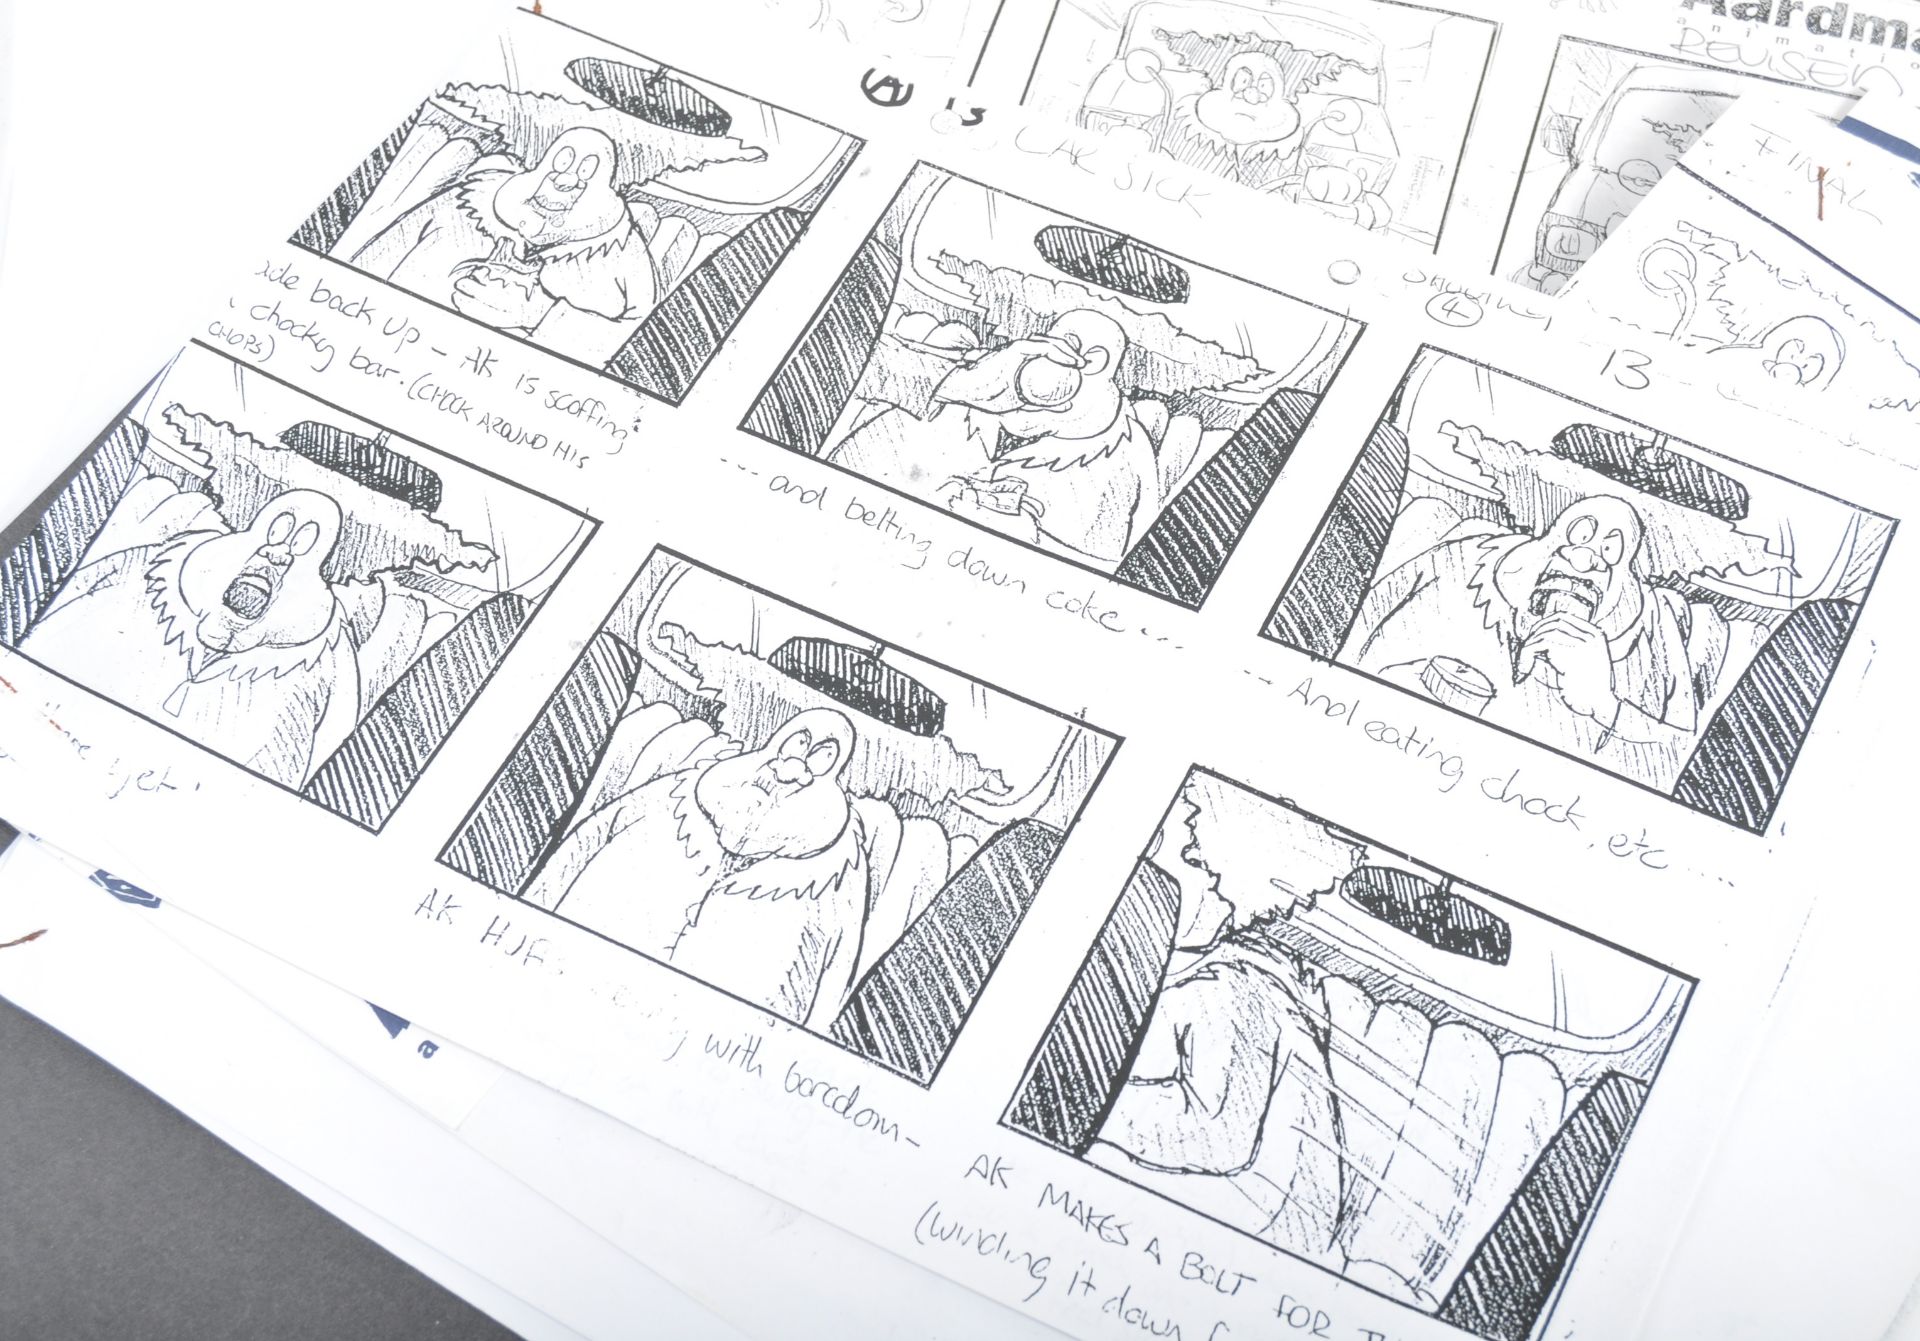 AARDMAN ANIMATIONS - ANGRY KID (1999) - PRODUCTION STORYBOARDS - Image 3 of 7